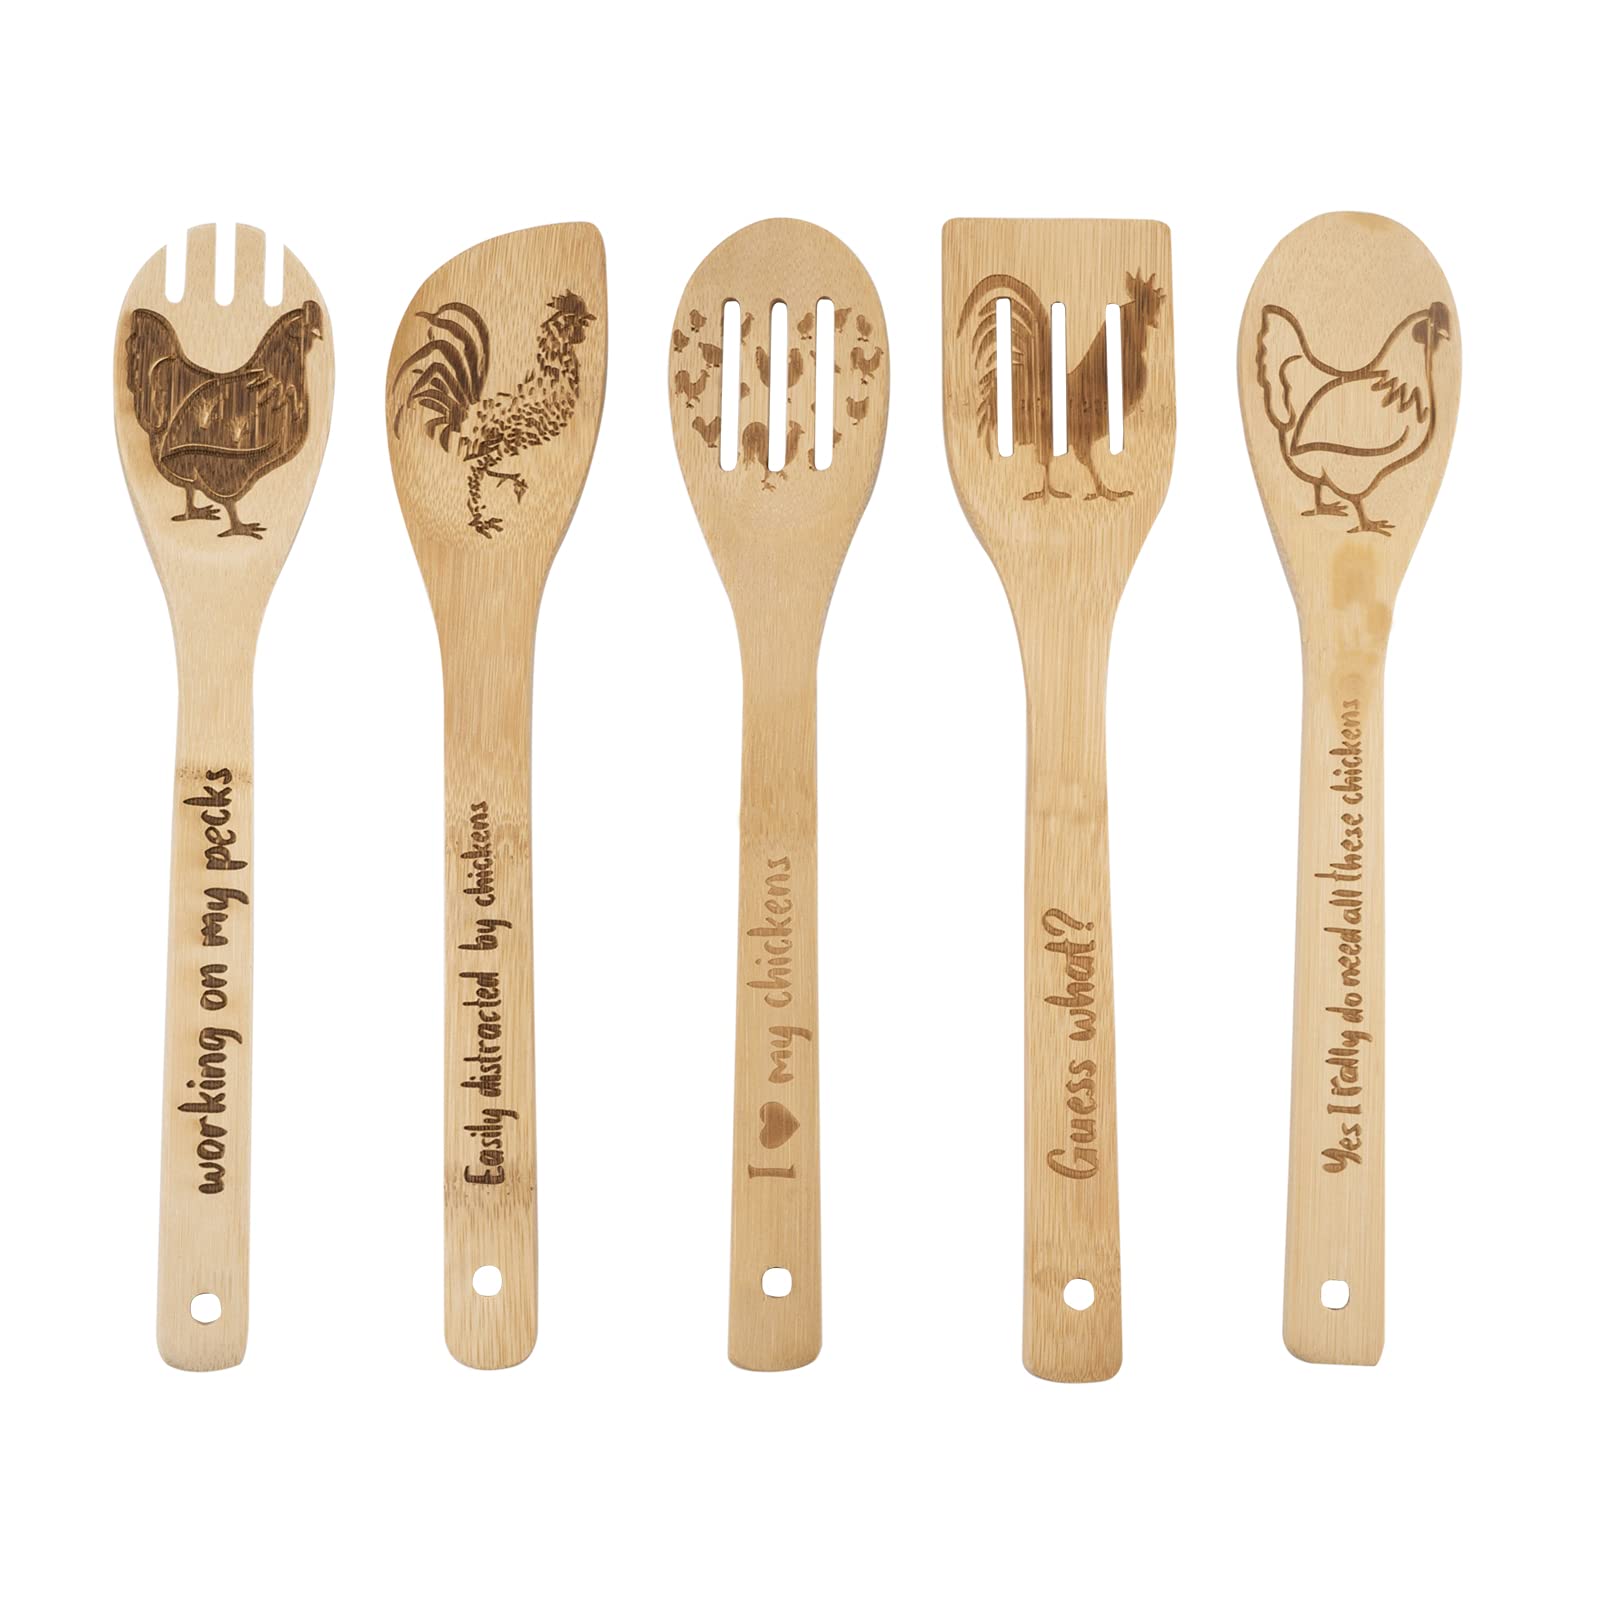 Rooster Wooden Cooking Spoons Set of 5,Rooster Gift,Chicken Lovers Gifts,Rooster Kitchen Decor,Bamboo Cooking Spoons Farmhouse Housewarming Wedding Mom Cooking Mother's Day Gift Father's Day Gift